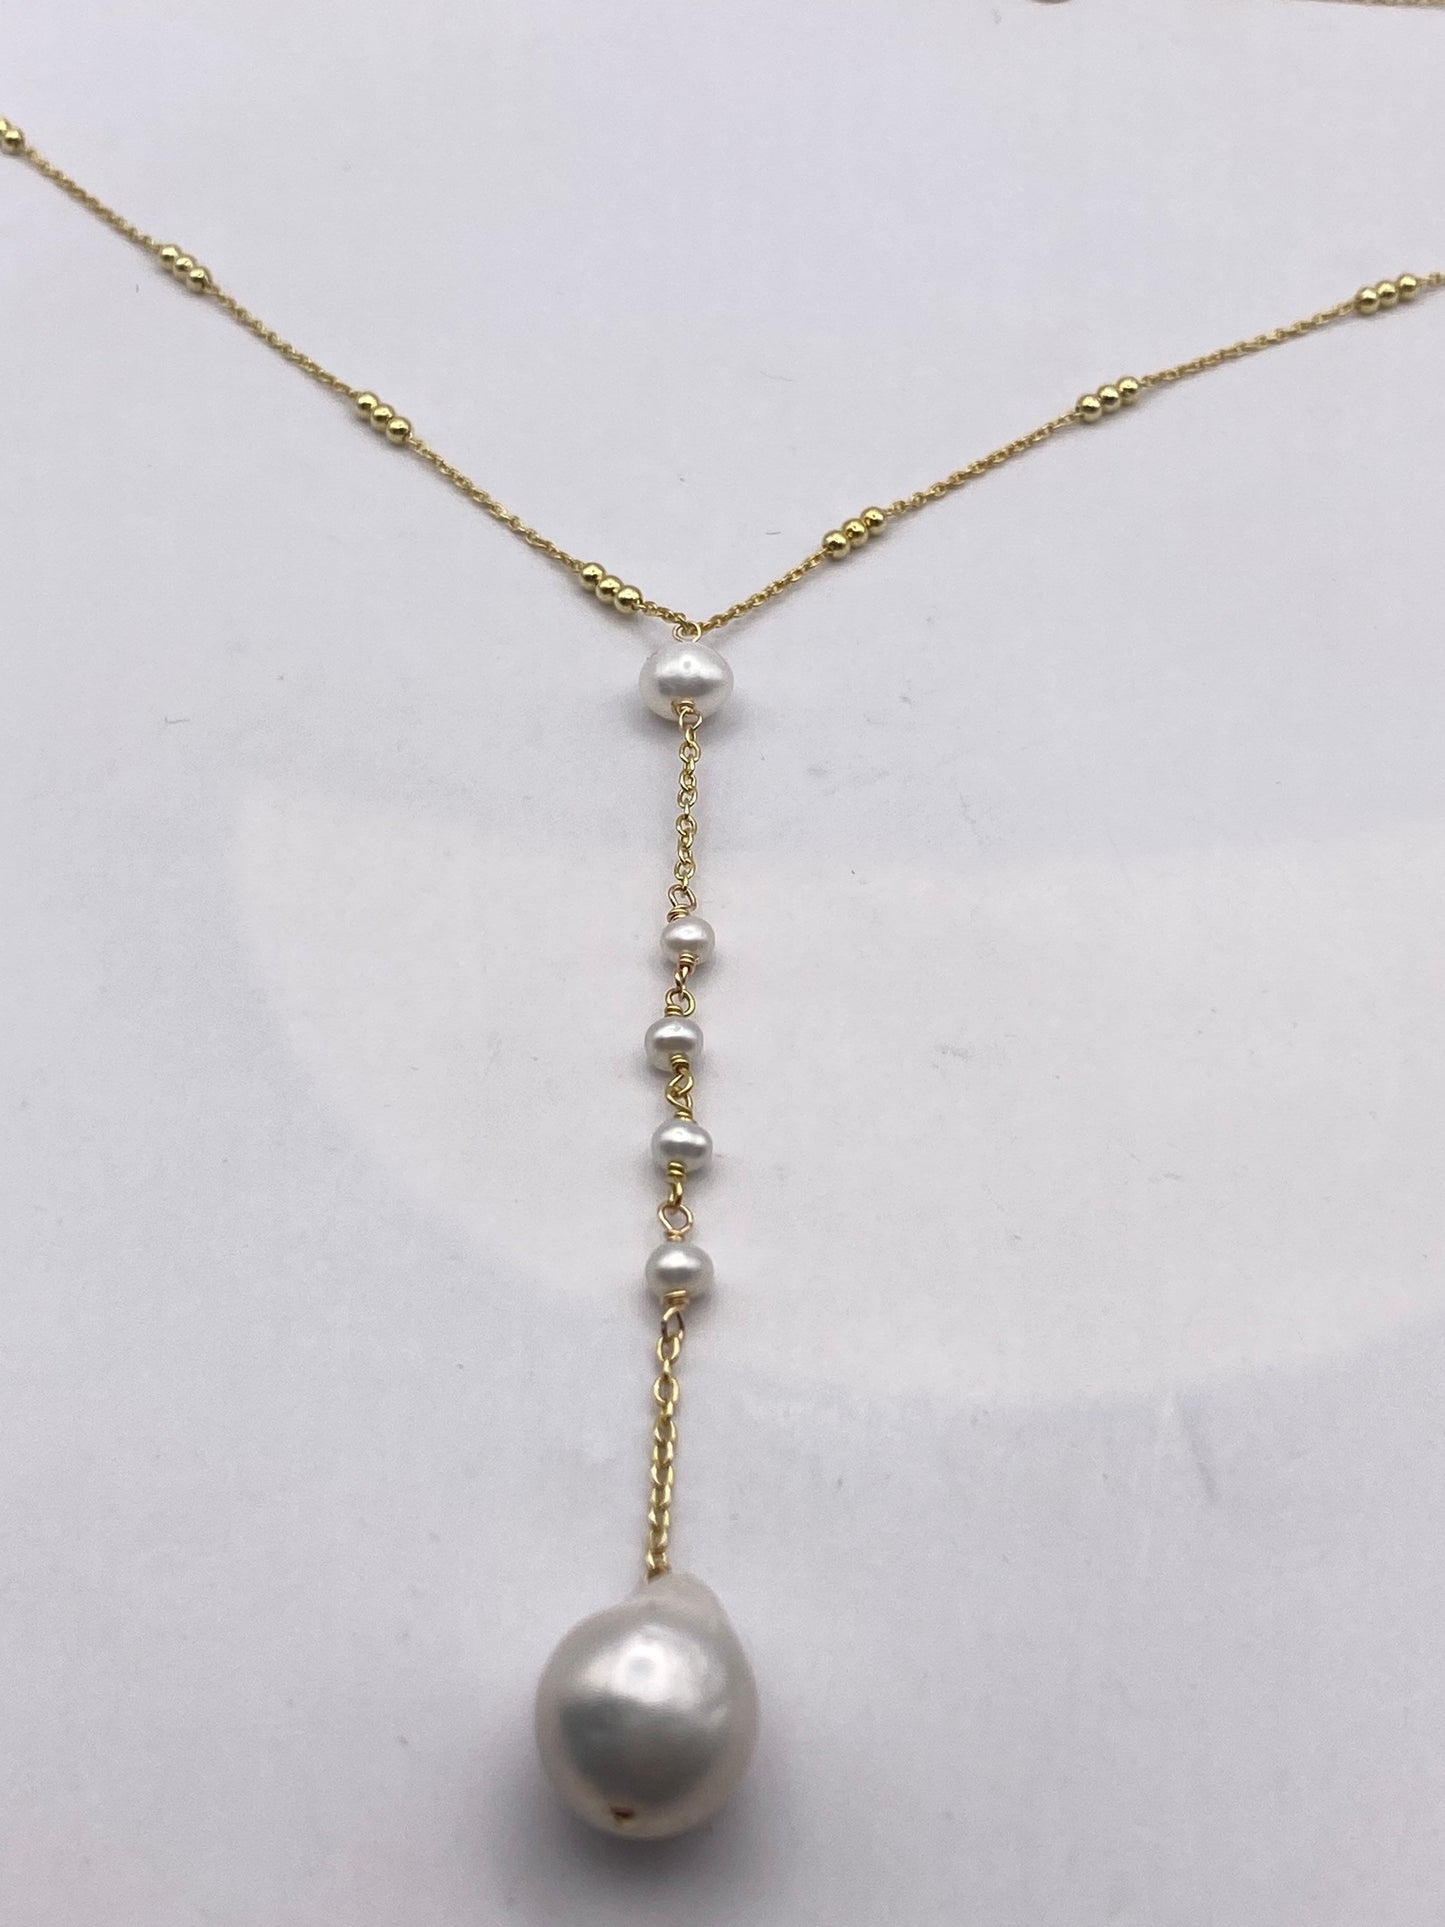 Vintage Golden 925 Sterling Silver White Pearl Pendant 16 inch Y necklace